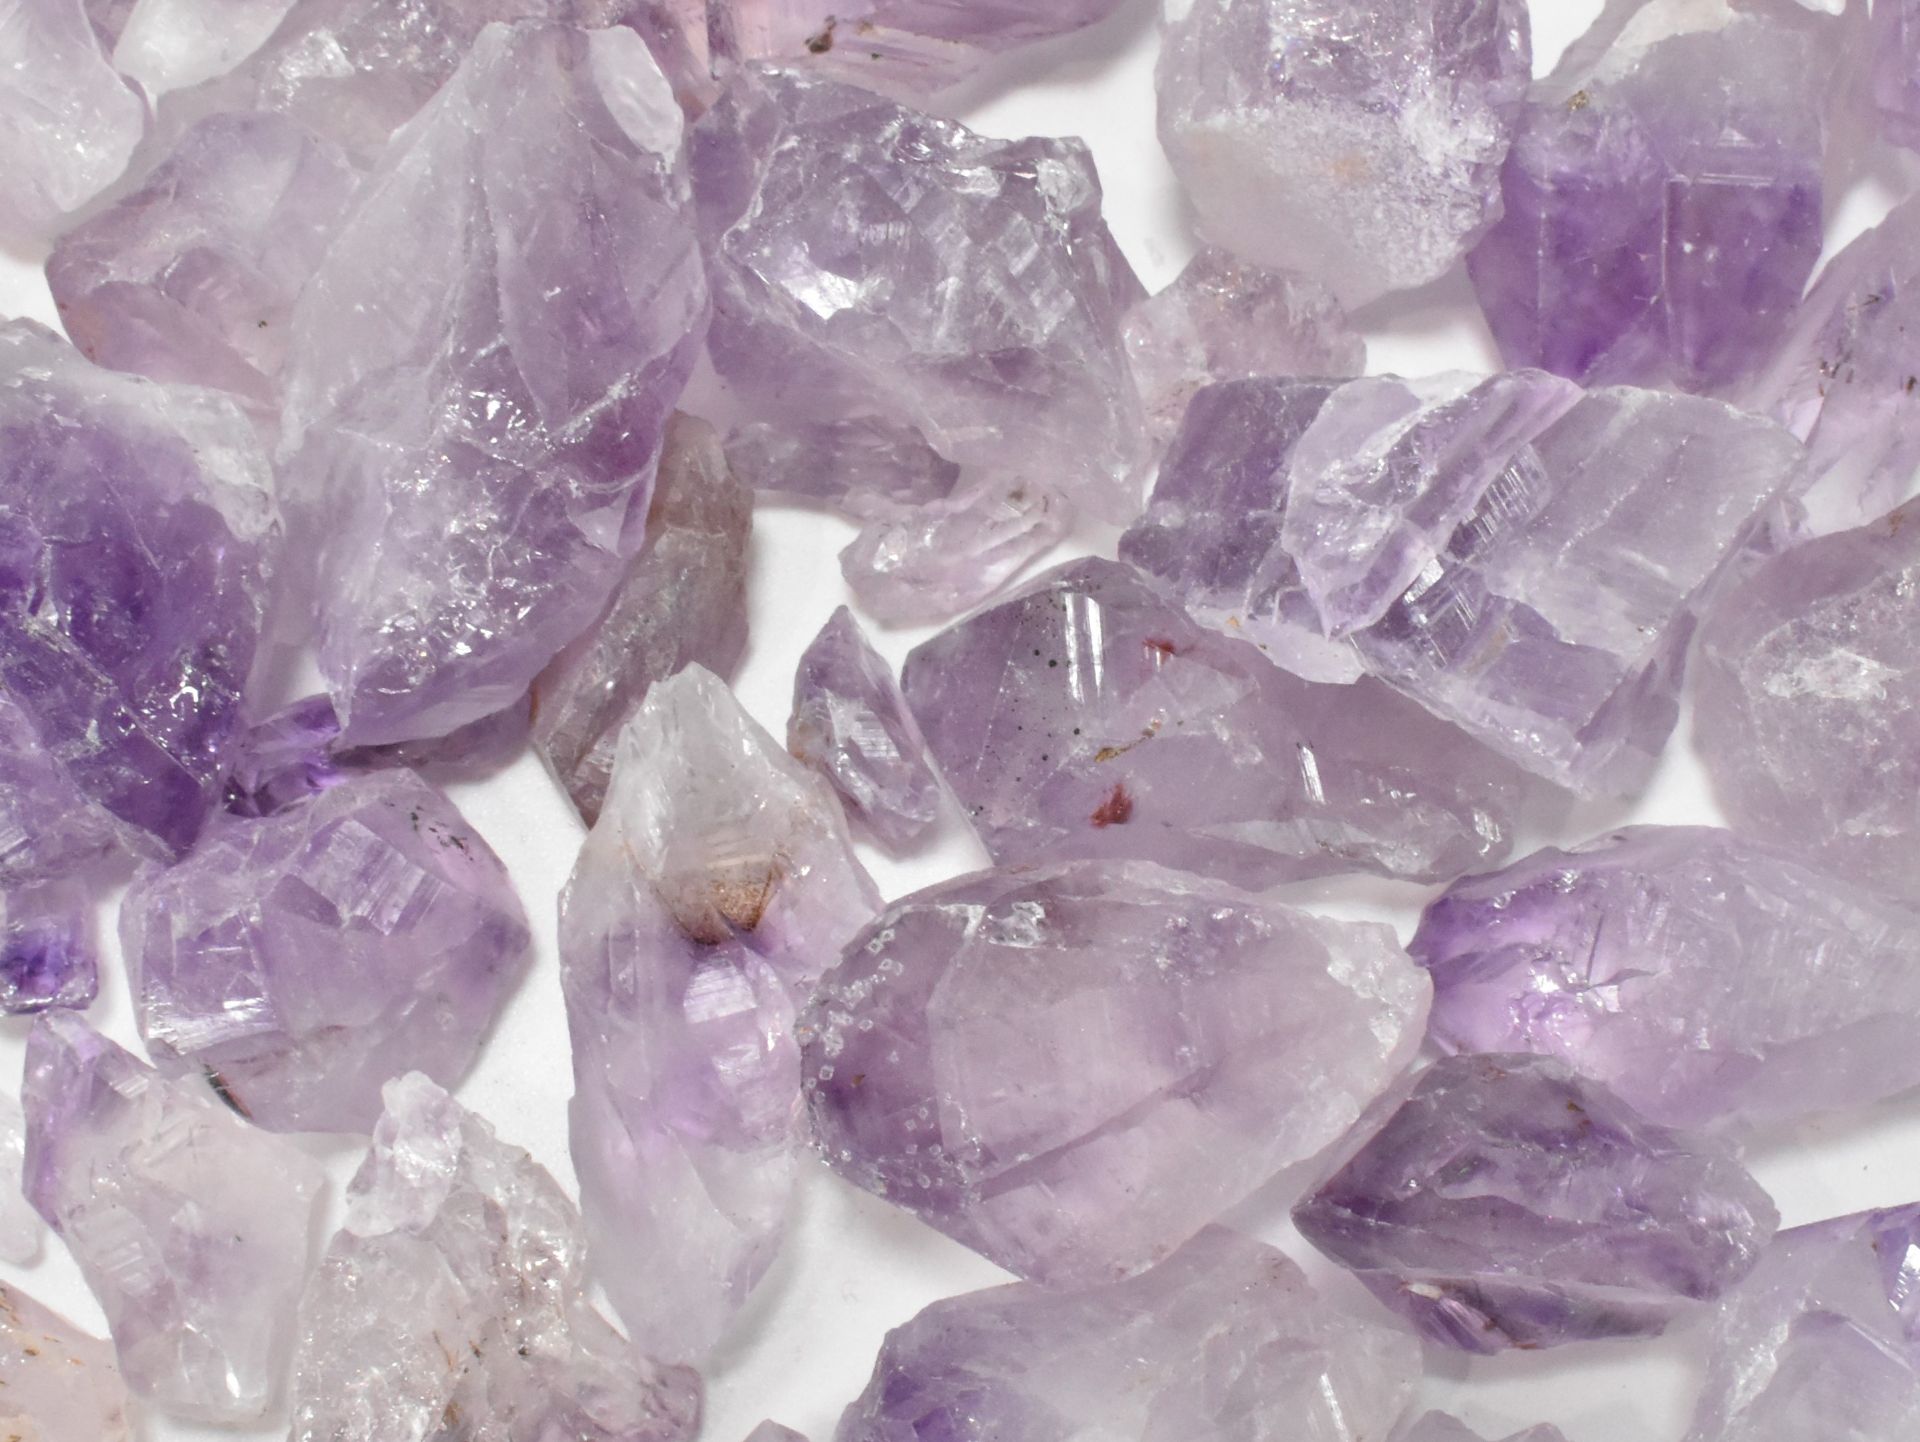 MINERAL SPECIMENS - COLLECTION OF AMETHYST QUARTZ - Image 2 of 5